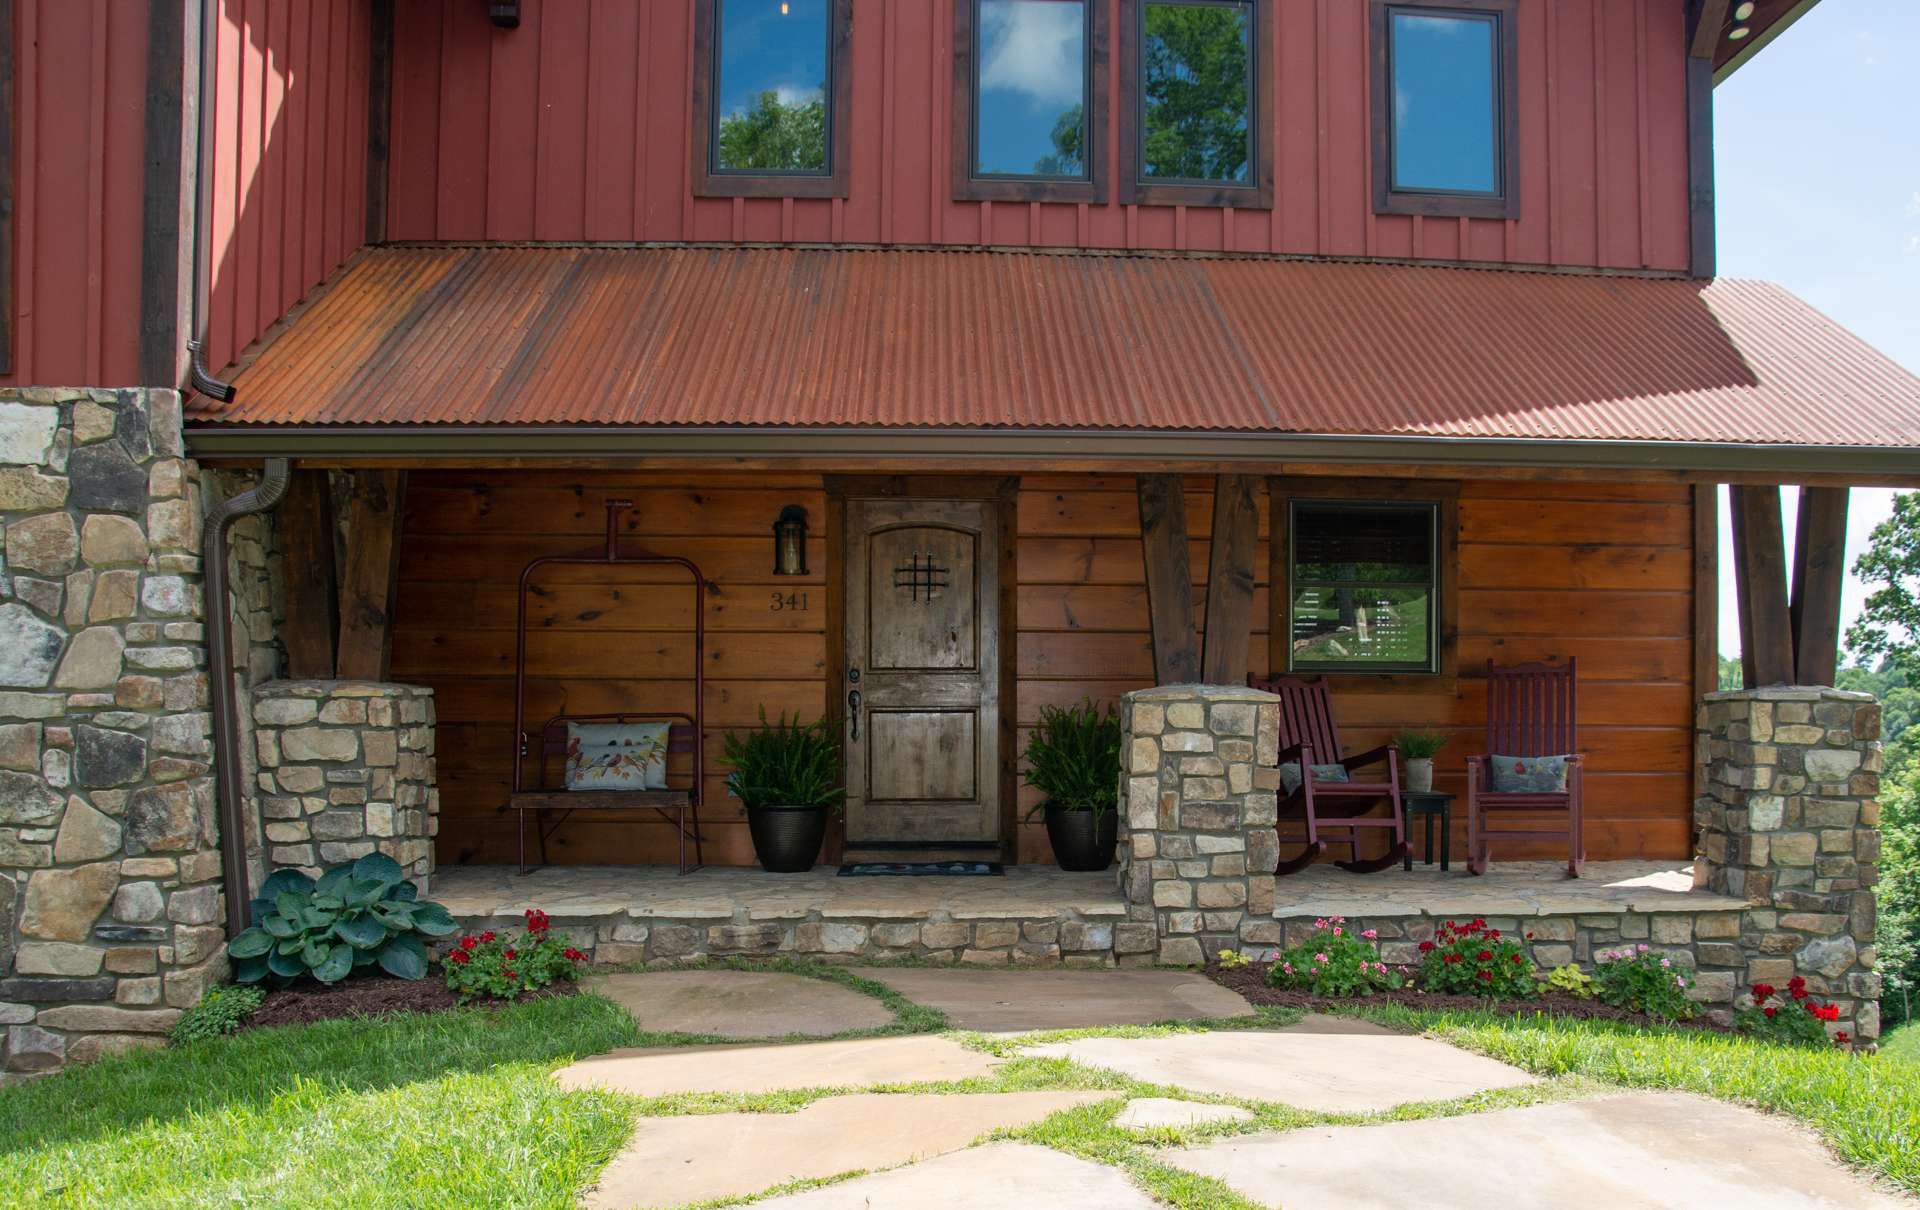 A covered front porch welcomes you to come inside to explore the many custom details and architectural accents that make this mountain home a true treasure.